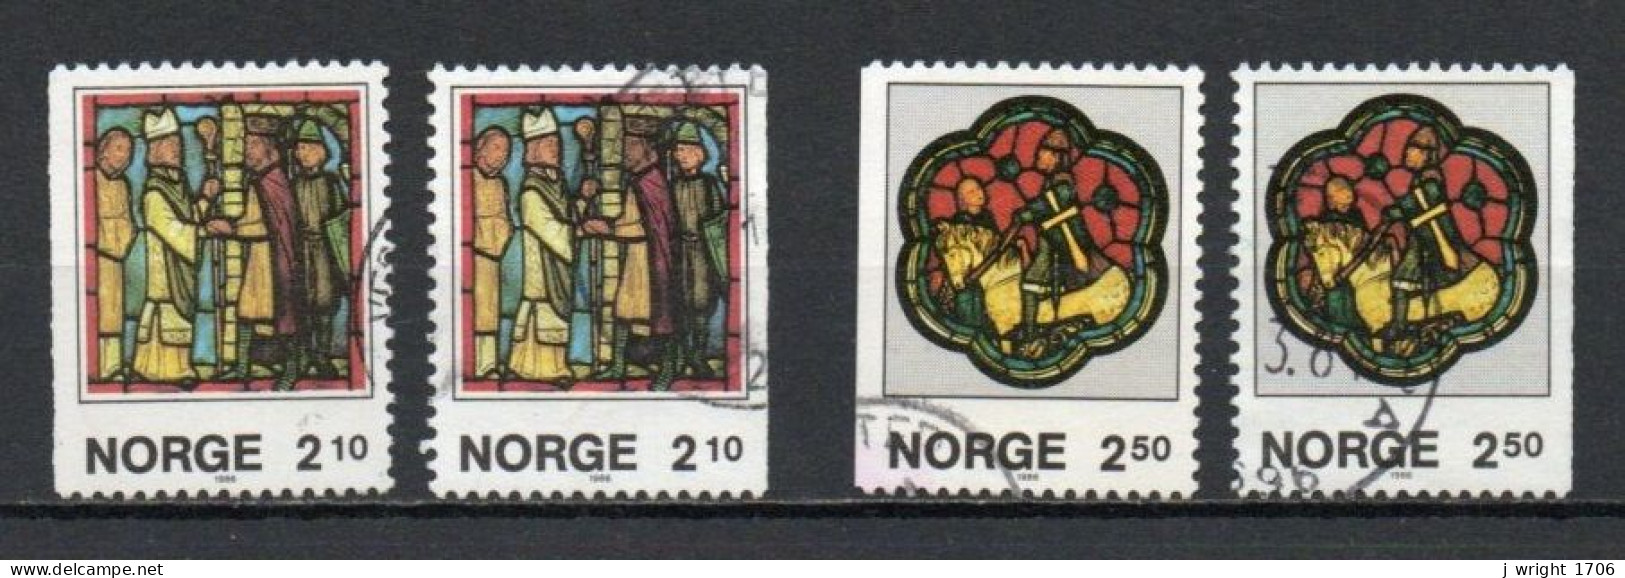 Norway, 1986, Christmas, Set, USED - Used Stamps